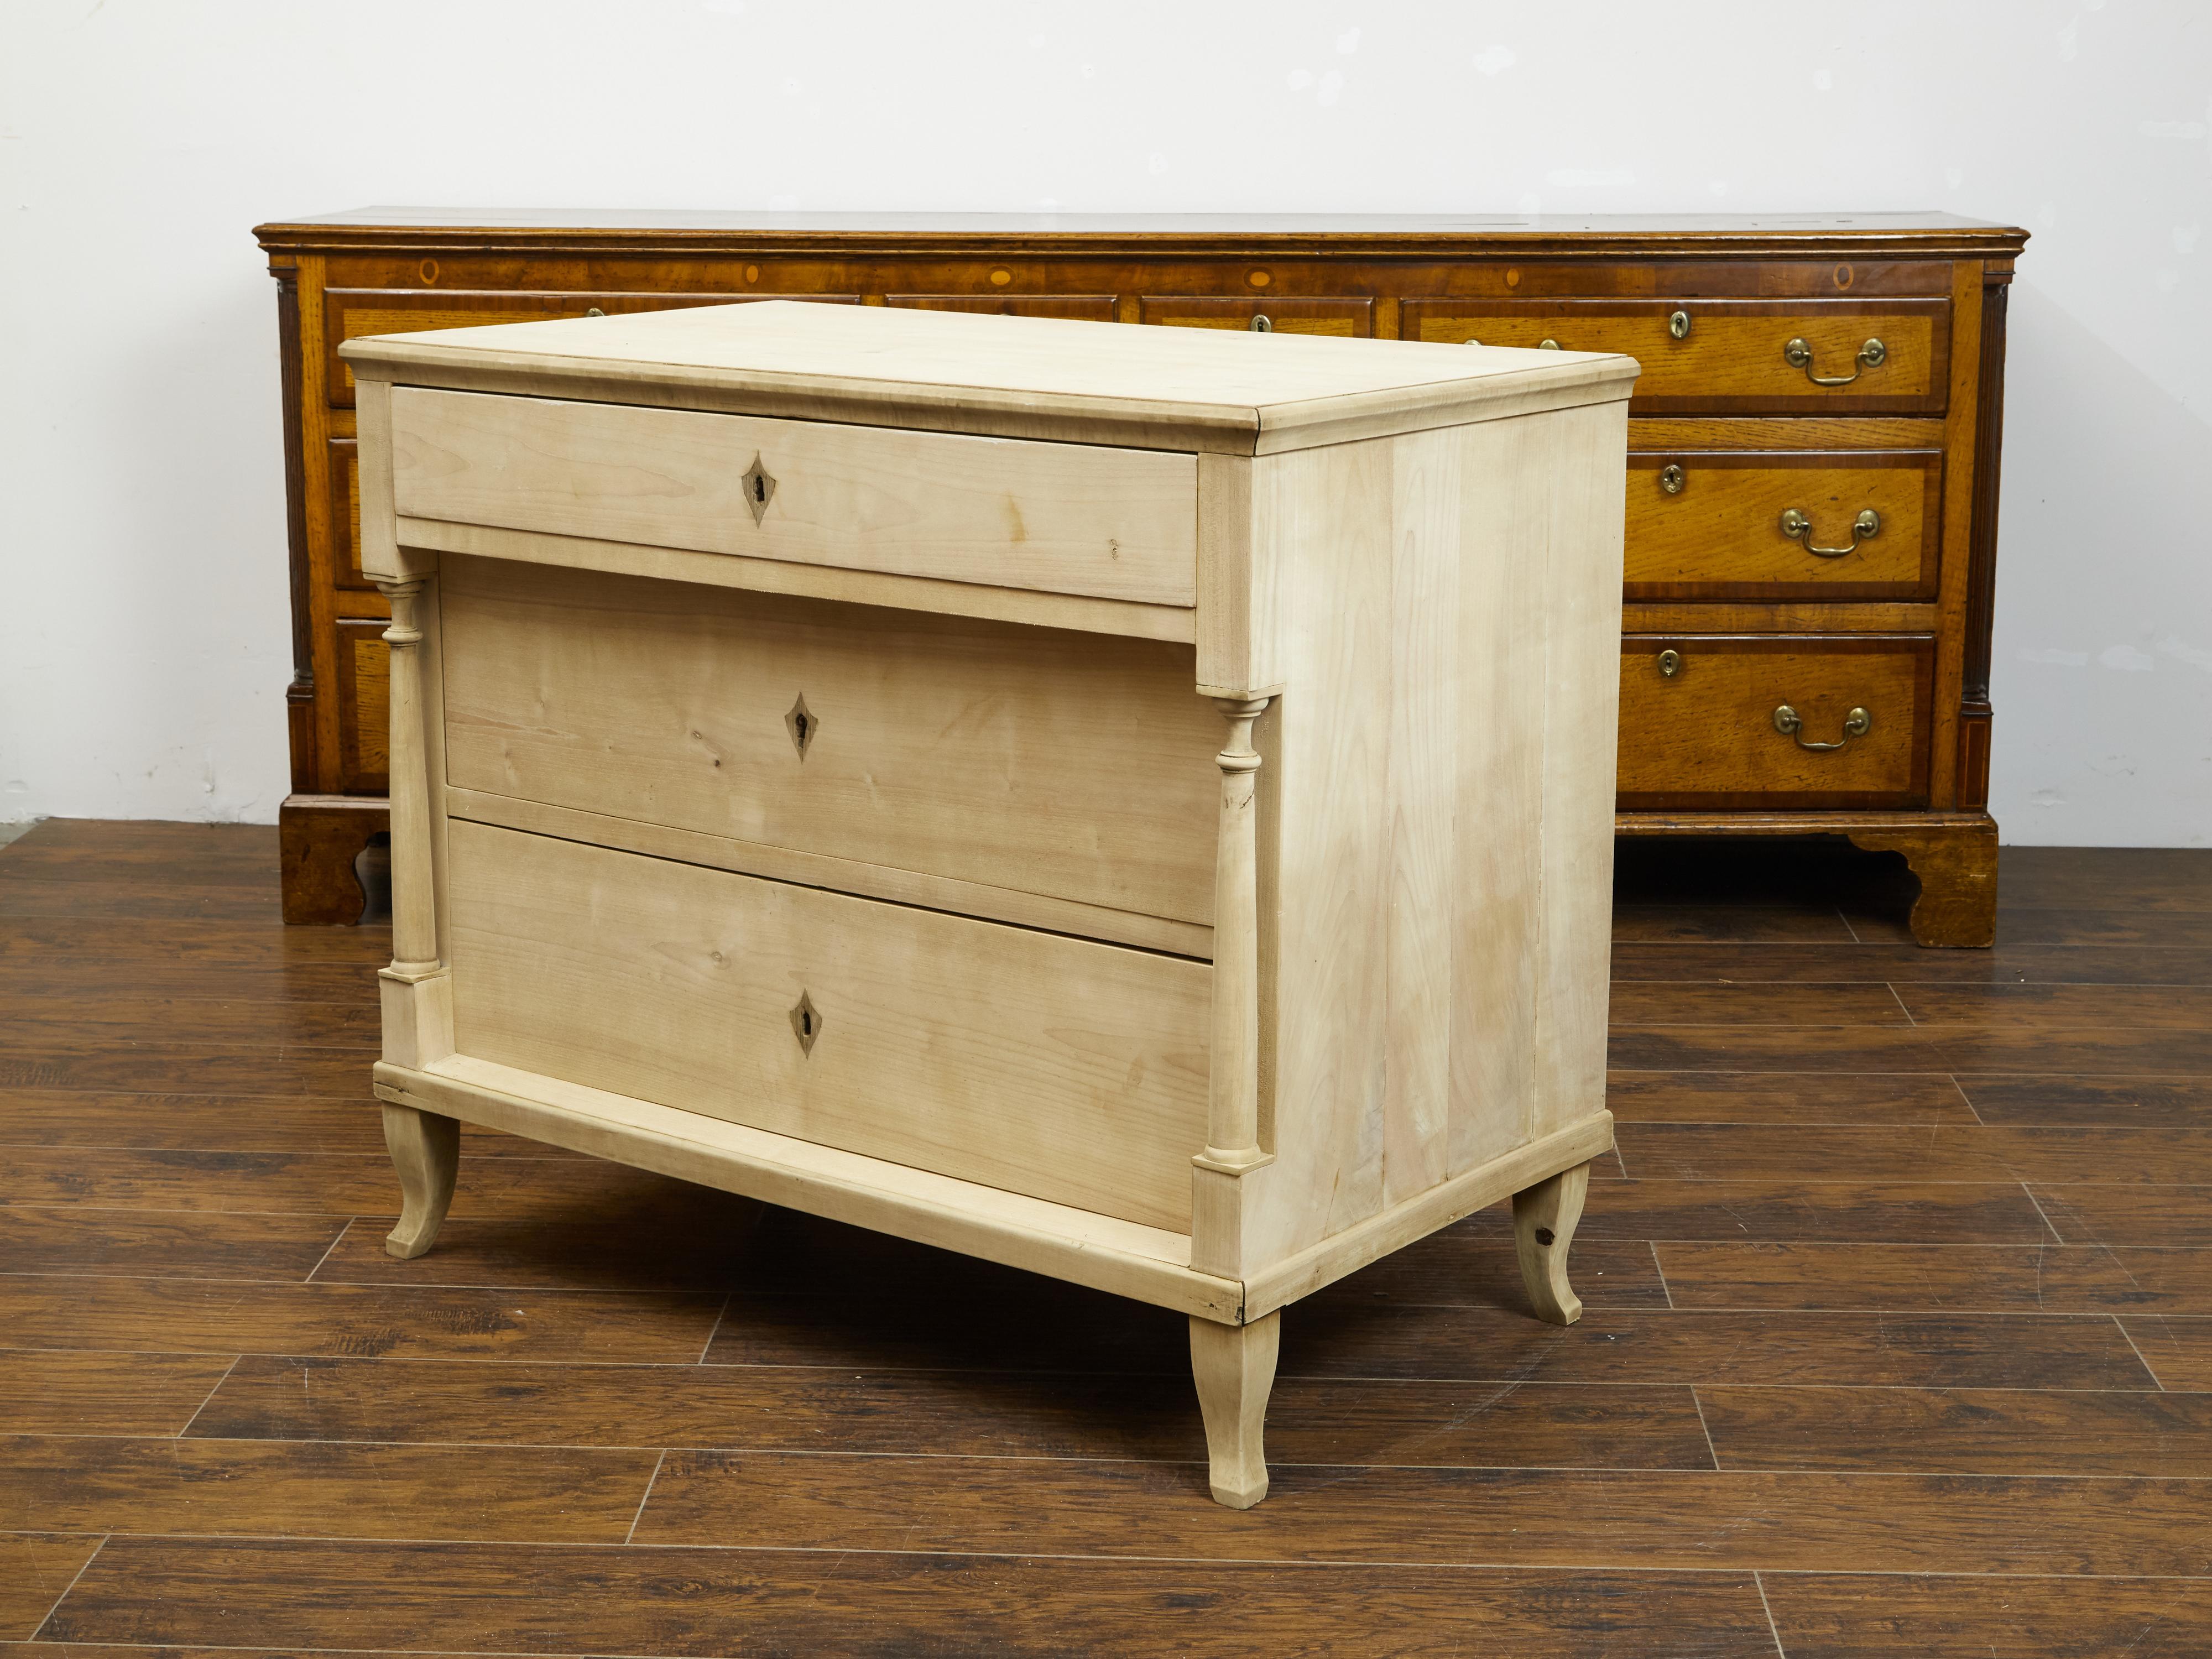 An Austrian Biedermeier bleached wooden commode from the 19th century, with three drawers and petite columns. Created in Austria during the Biedermeier period, this freshly bleached commode features a rectangular top sitting above three drawers, the